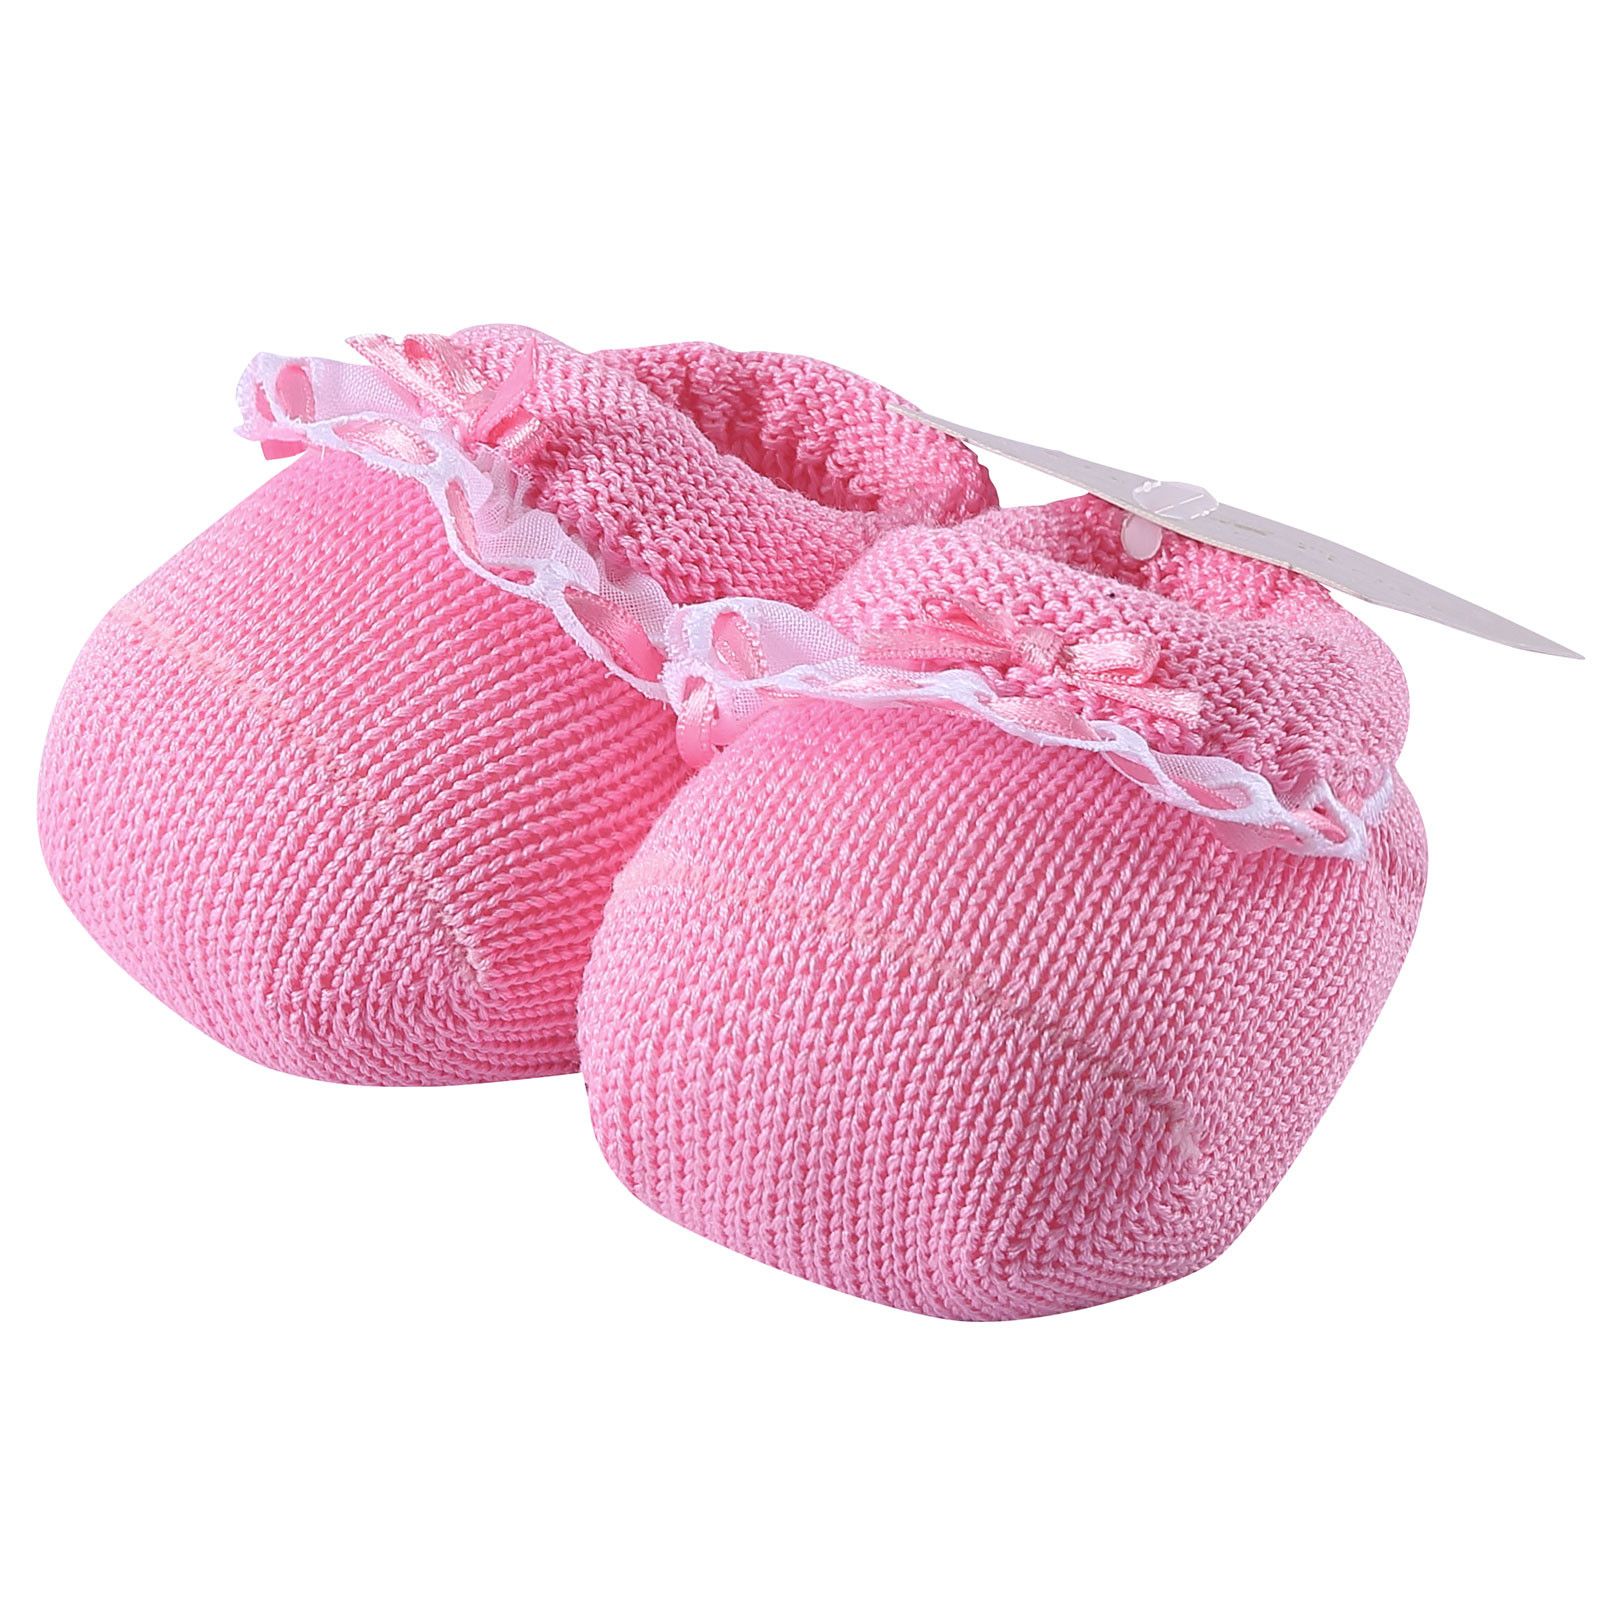 Baby Pink Lace Trims Knitted Cotton Shoes - CÉMAROSE | Children's Fashion Store - 1